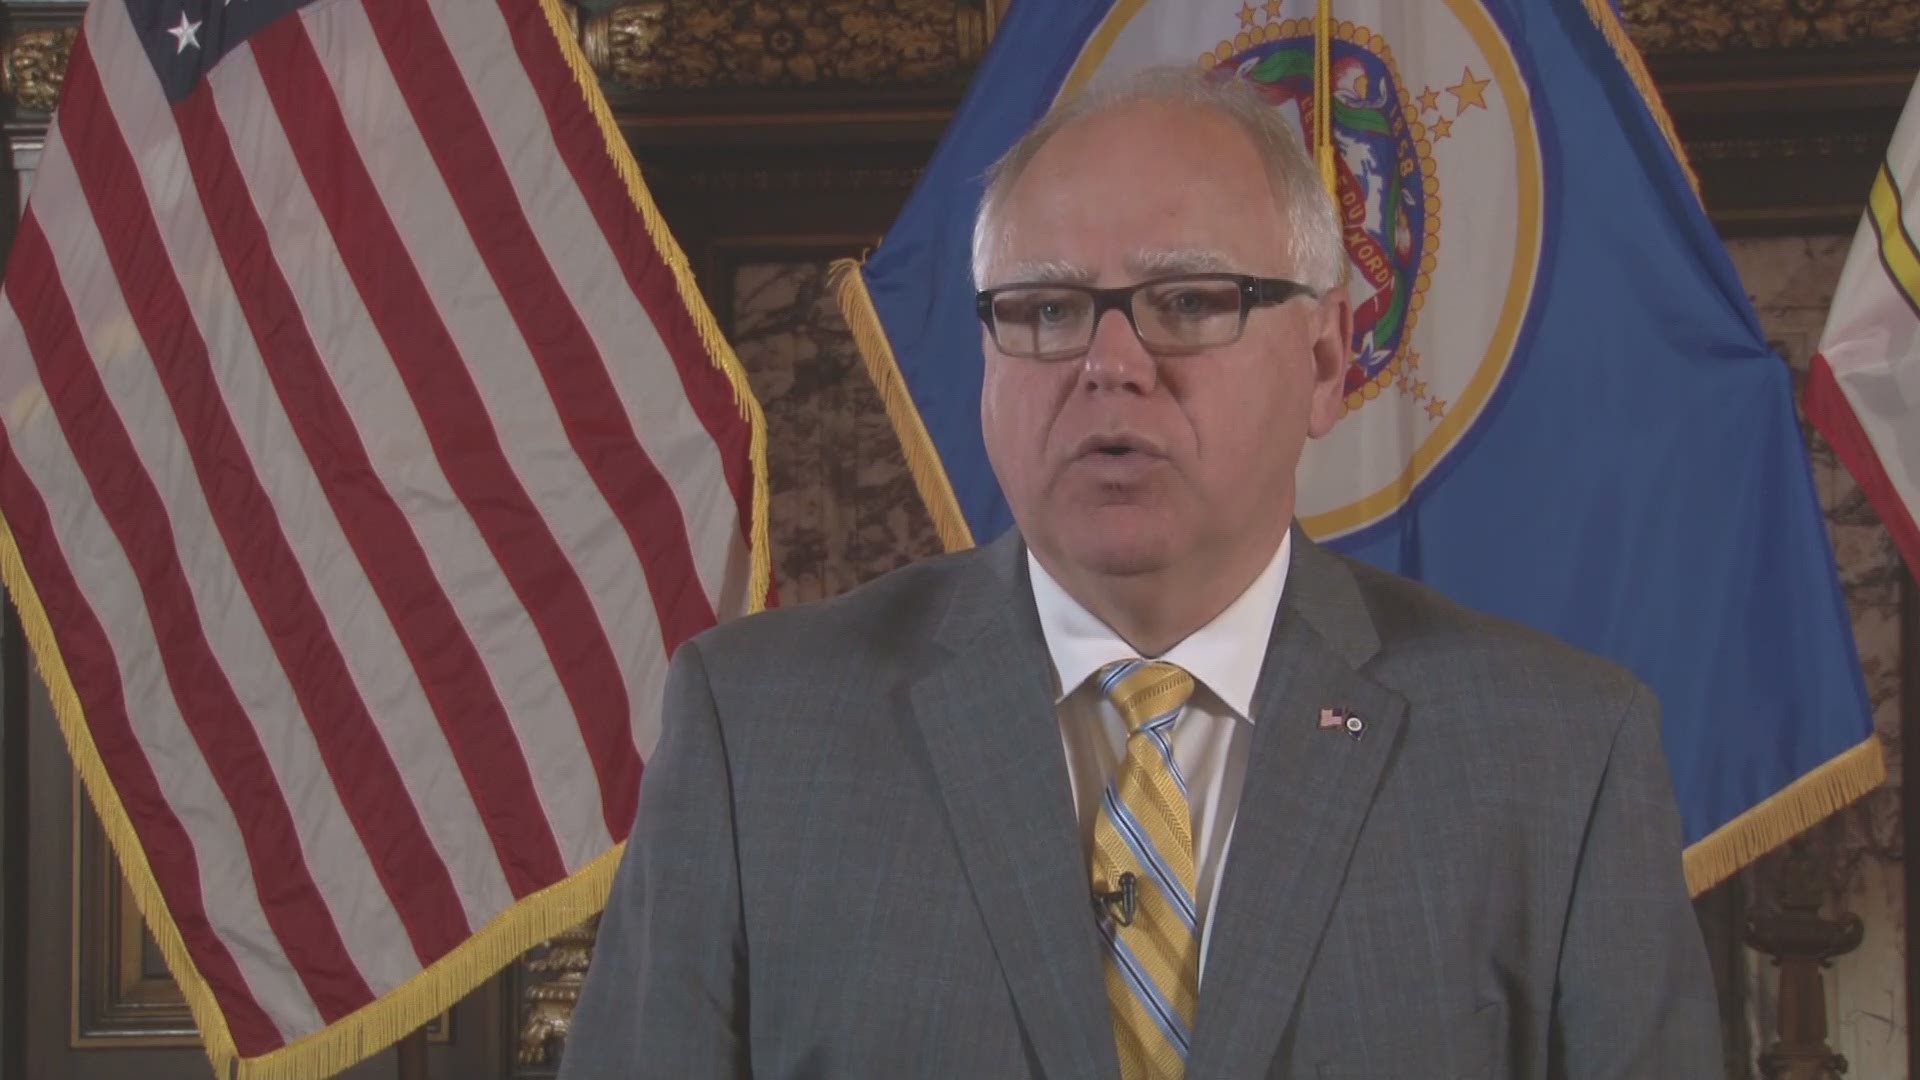 In an interview with KARE, Gov. Tim Walz says he wants better health and education outcomes for the Minnesota's children, especially for those who are falling behind. And that why he has formally relaunched the Children's Cabinet, which was originally established by law back in 1993.